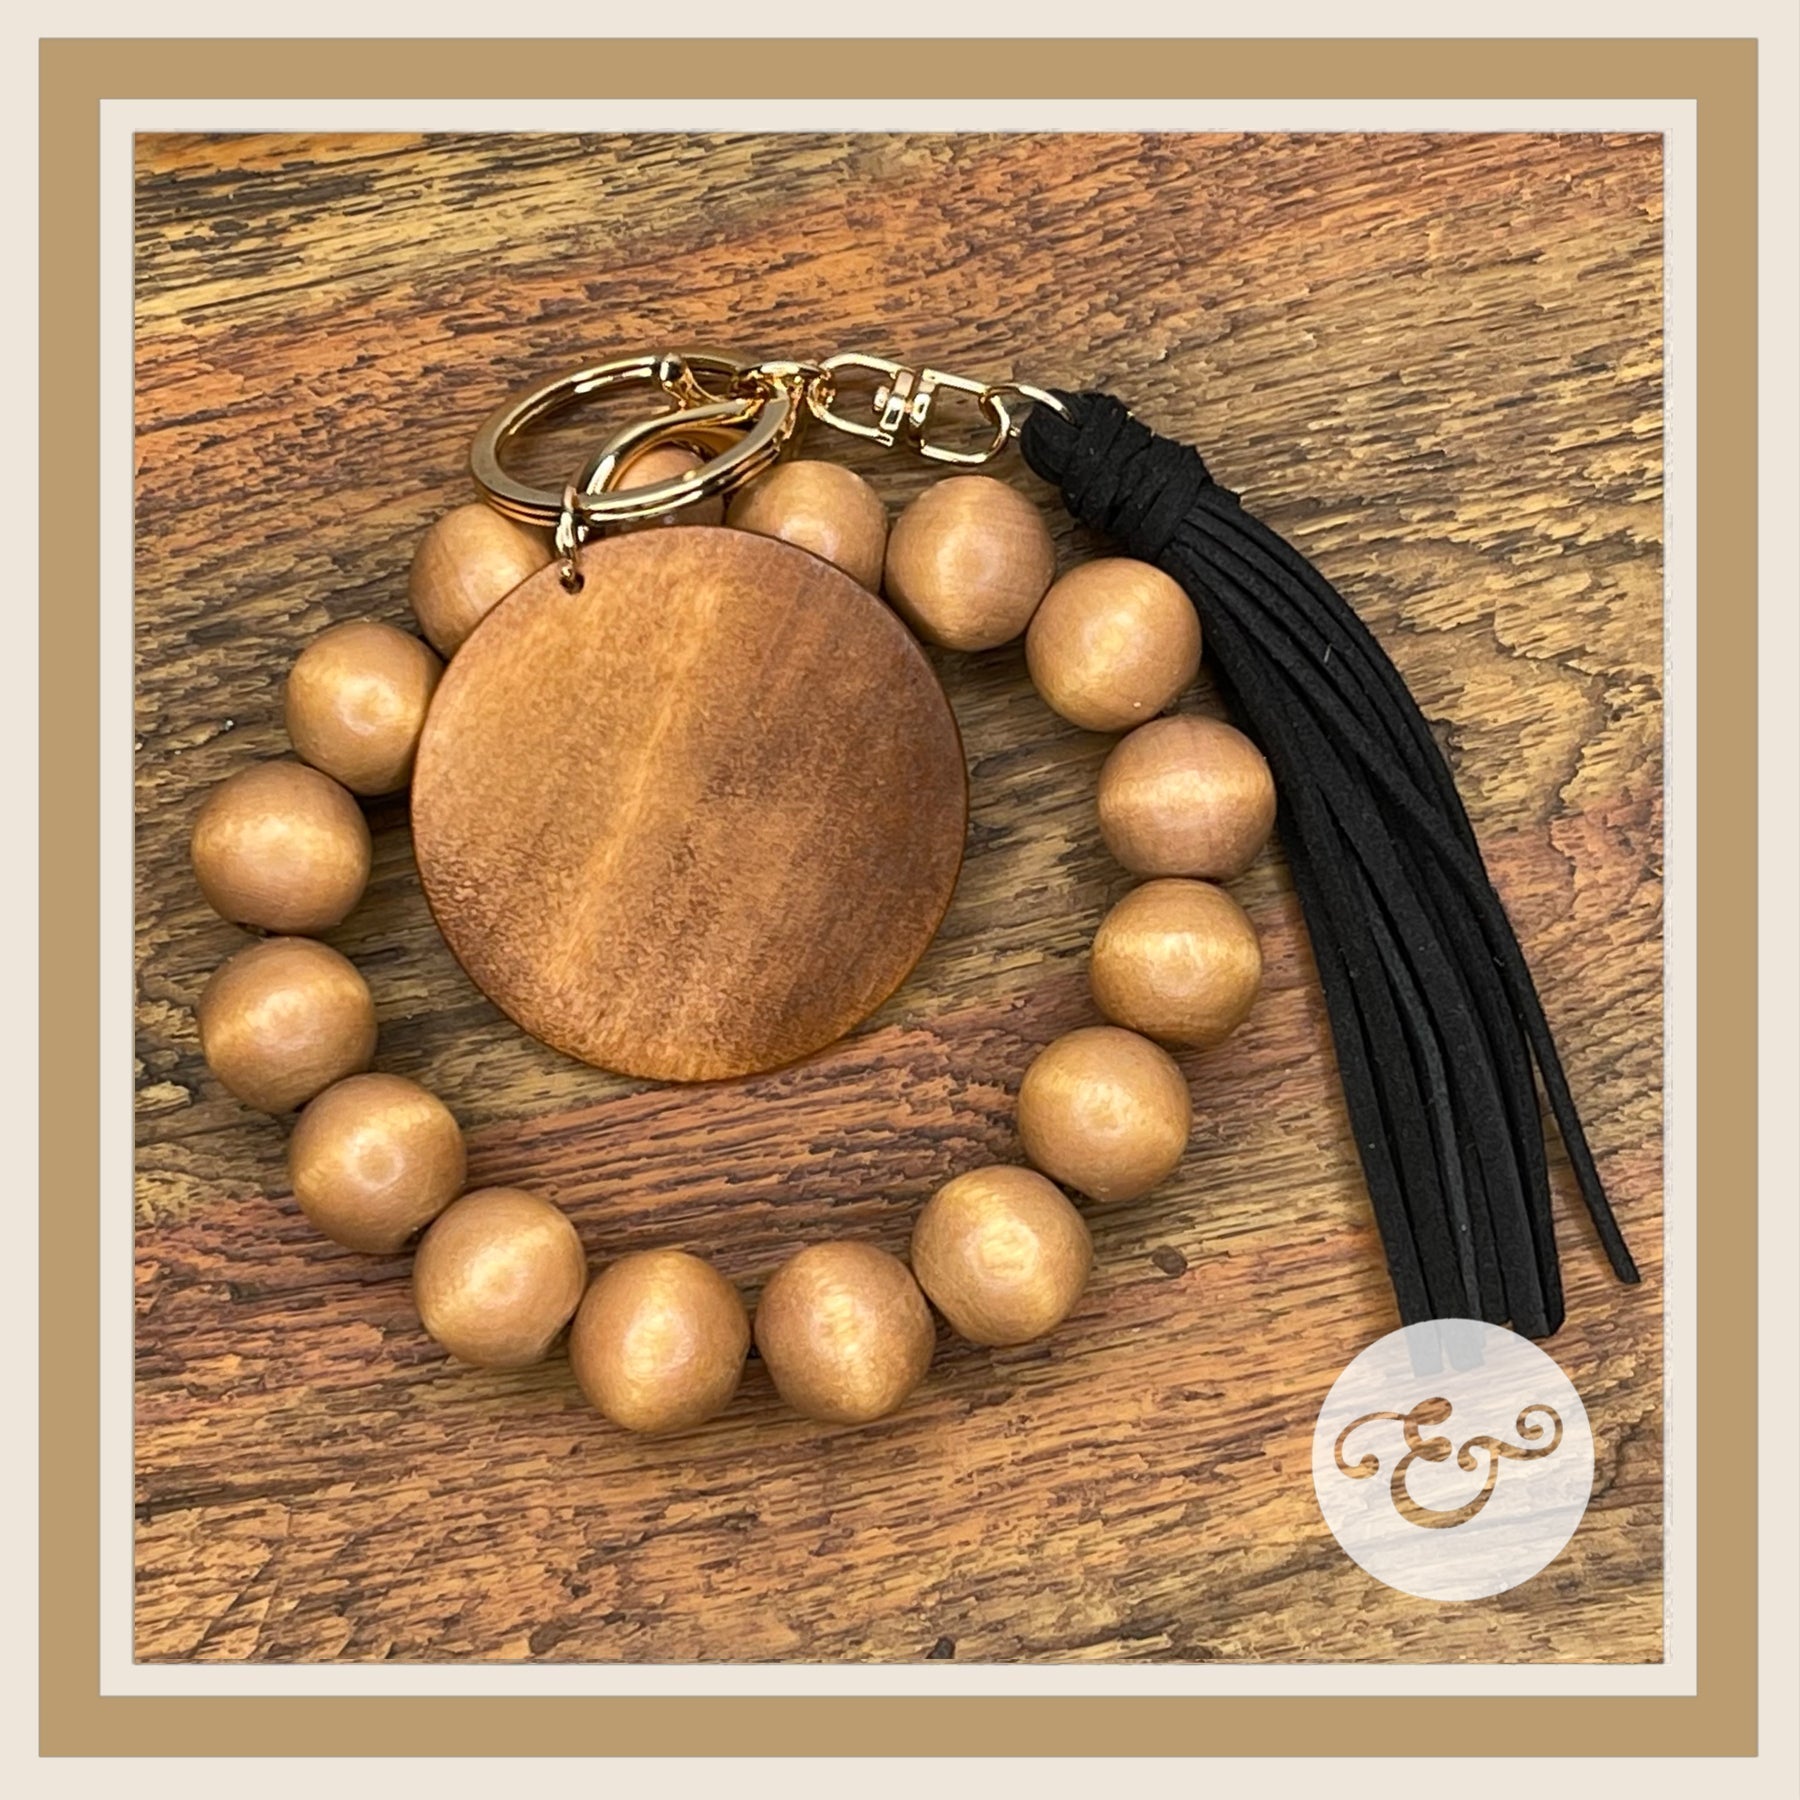 Sunshine Mixed With A Little Hurricane Wooden Bead Wristlet With Suede Tassel (6688719405134) (6688894517326) (6688895270990) (6690203795534)